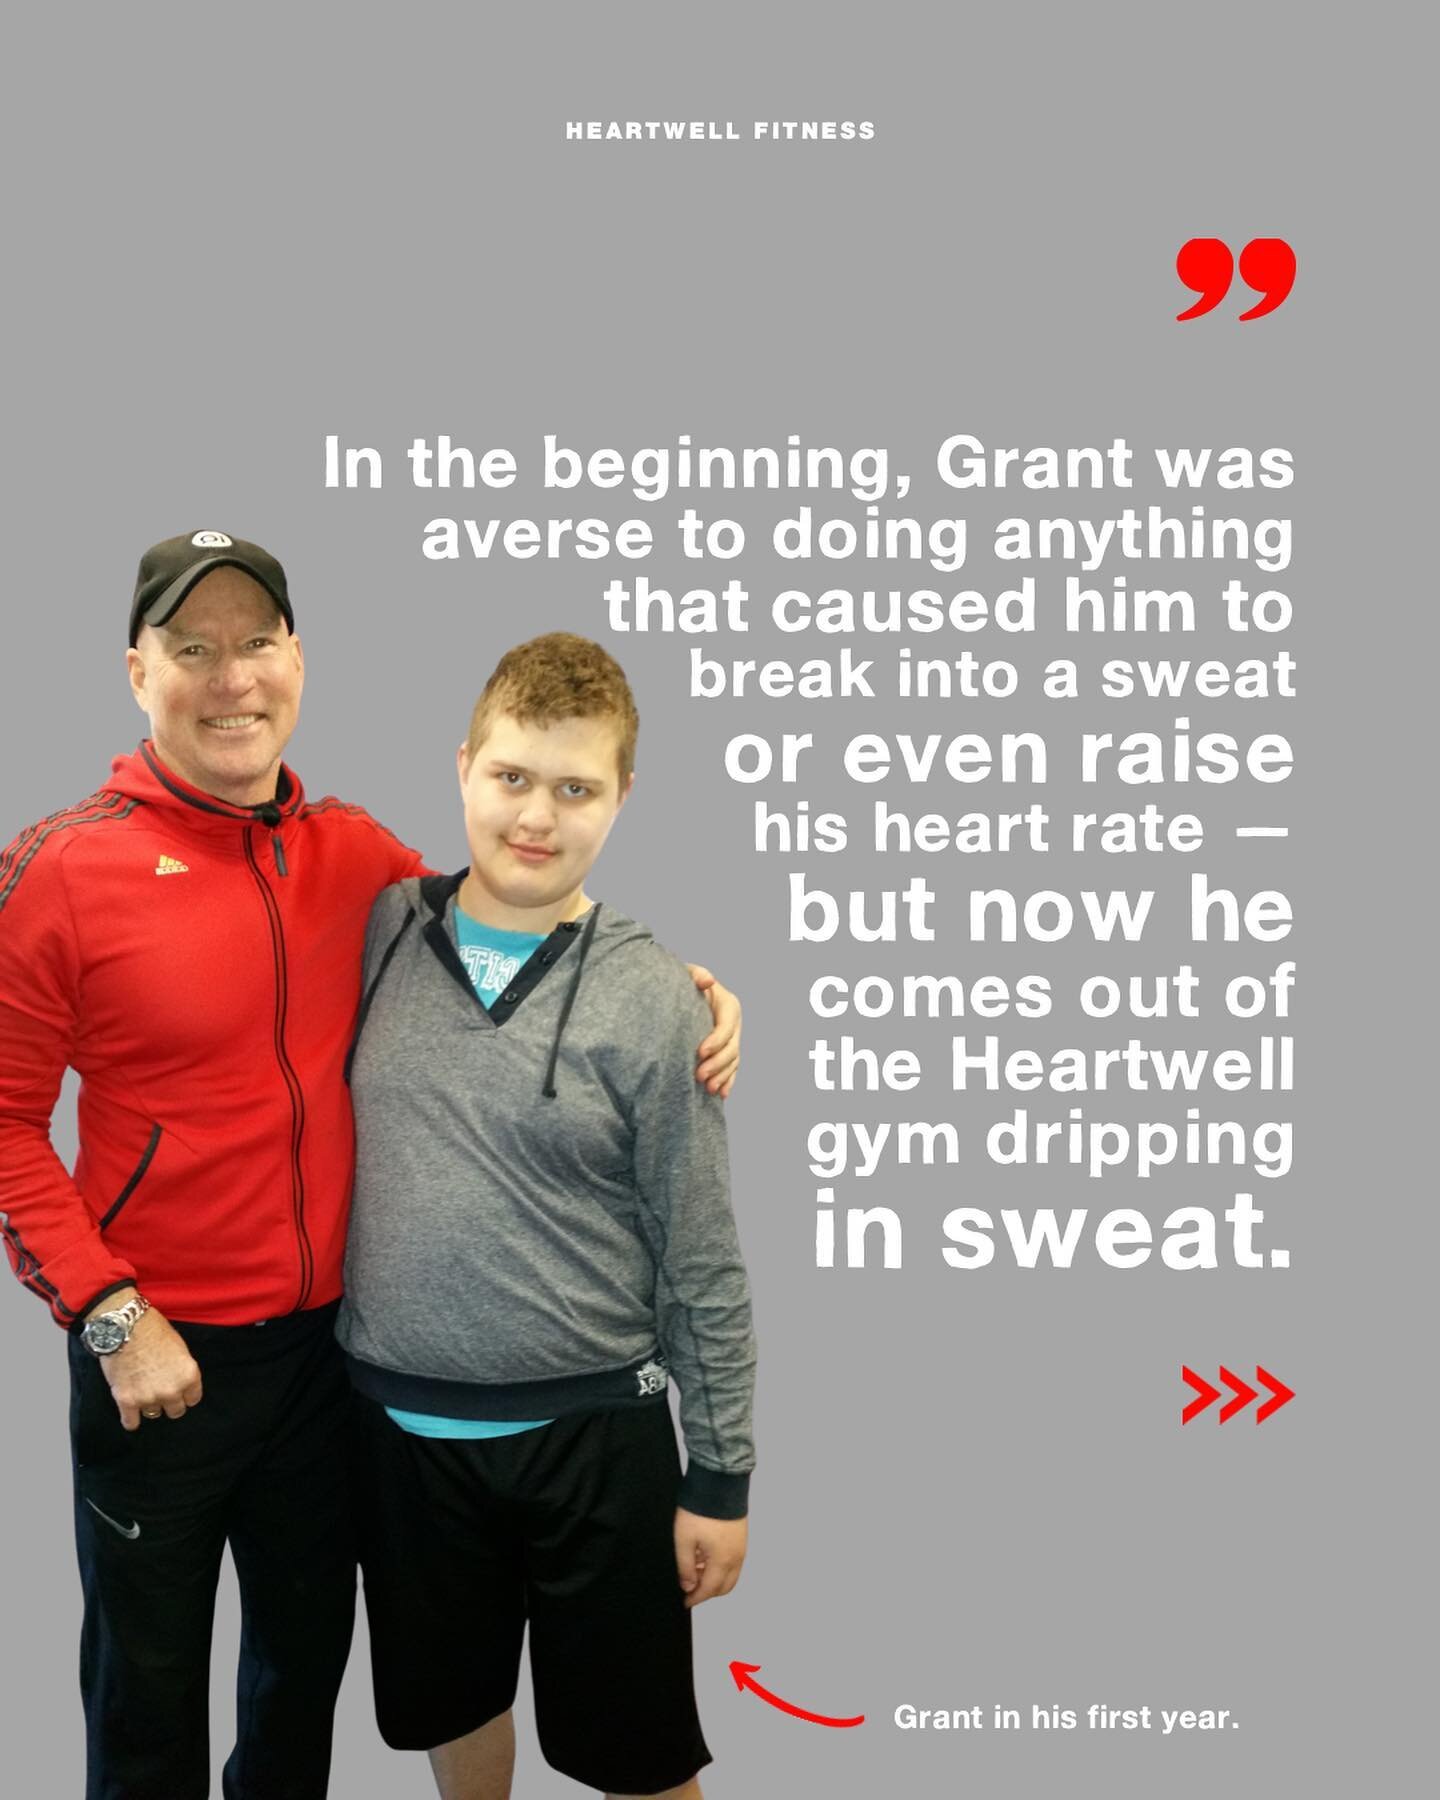 Ros, on her son Grant.

Slide one
In white text over grey background:
&ldquo;In the beginning, Grant was averse to doing anything that caused him to break into a sweat or even raise his heart rate &mdash; but now he comes out of the Heartwell gym dri